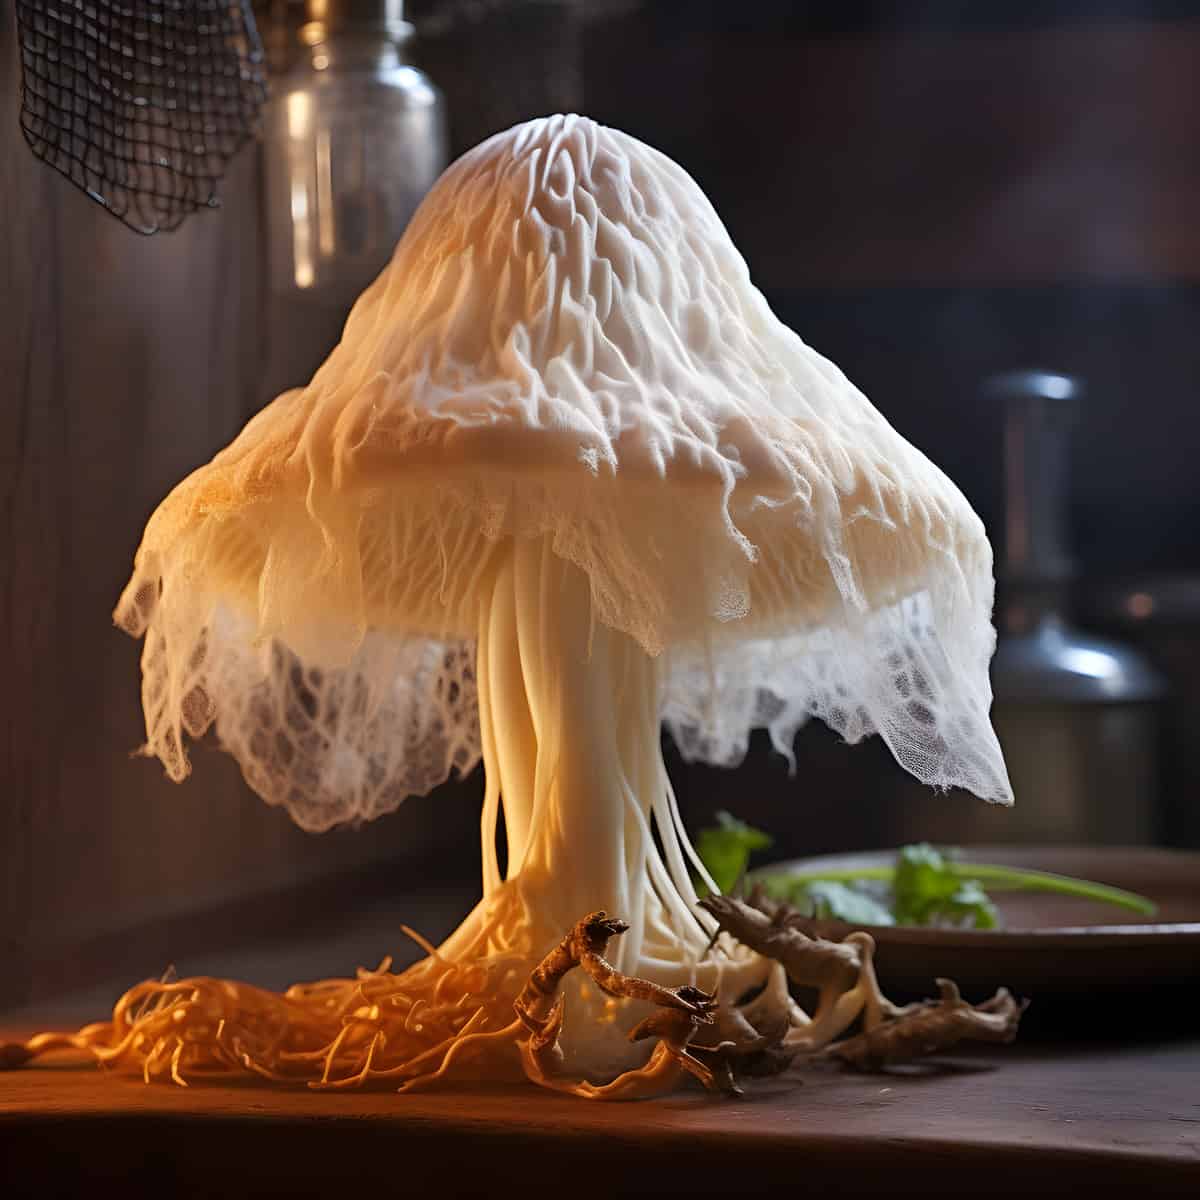 Veiled Lady Mushroom on a kitchen counter